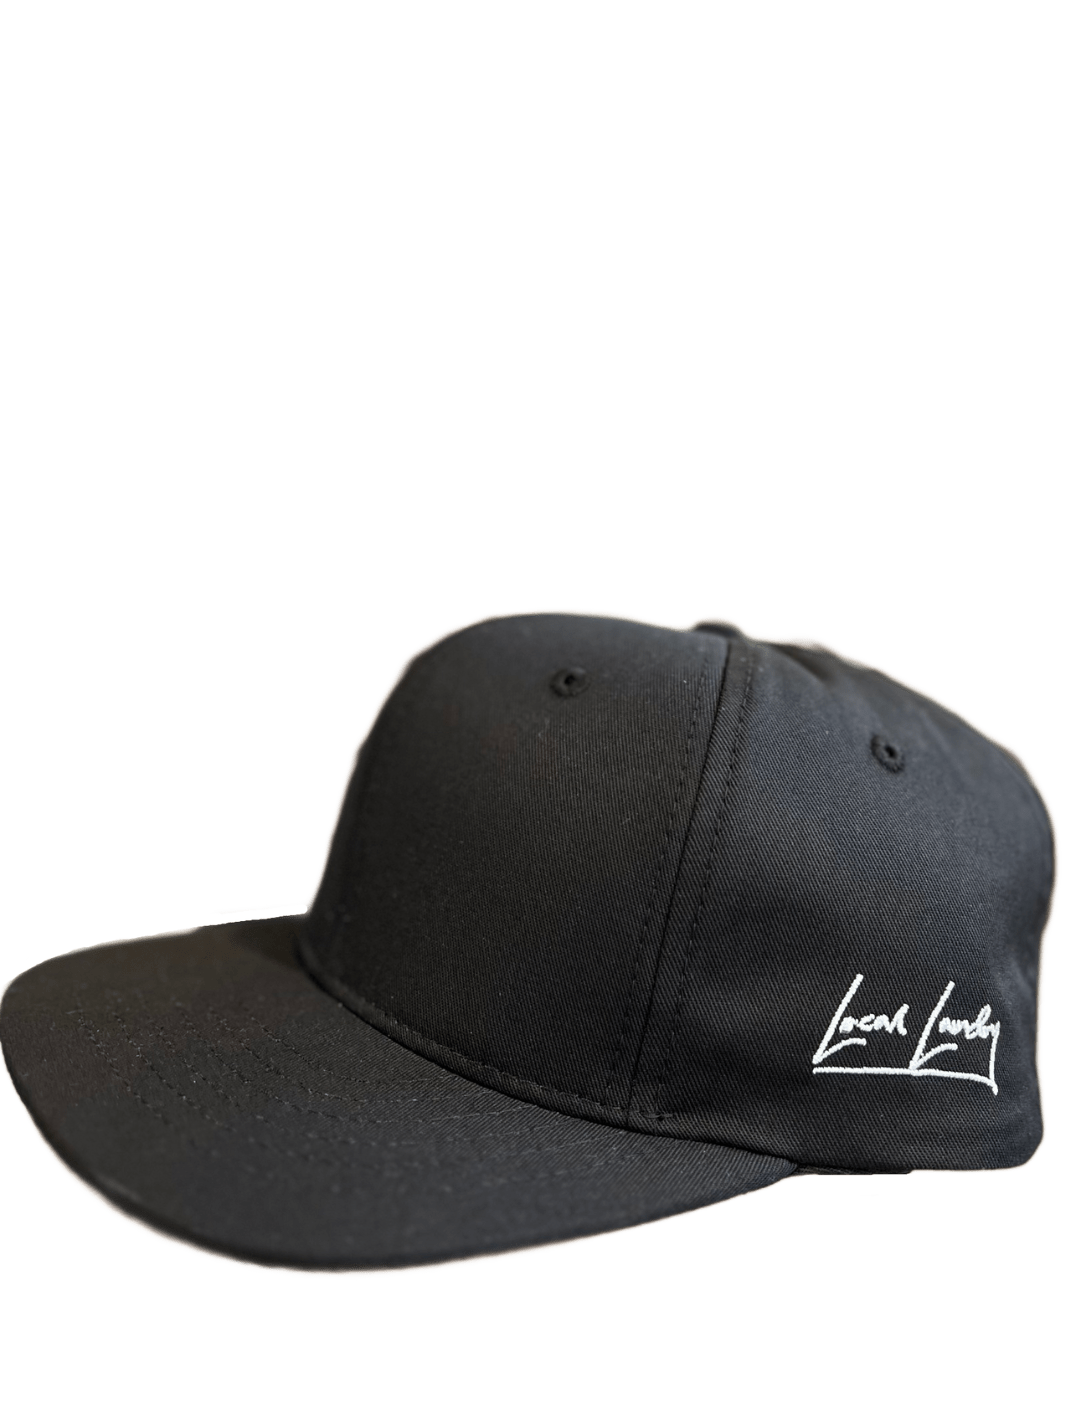 The side profile of the Rundle Snapback hat by Local Laundry, this sideprofile showcases the Local Laundry script sewn into the side of the hat. Made in Vancouver, BC Canada of sustainable materials.